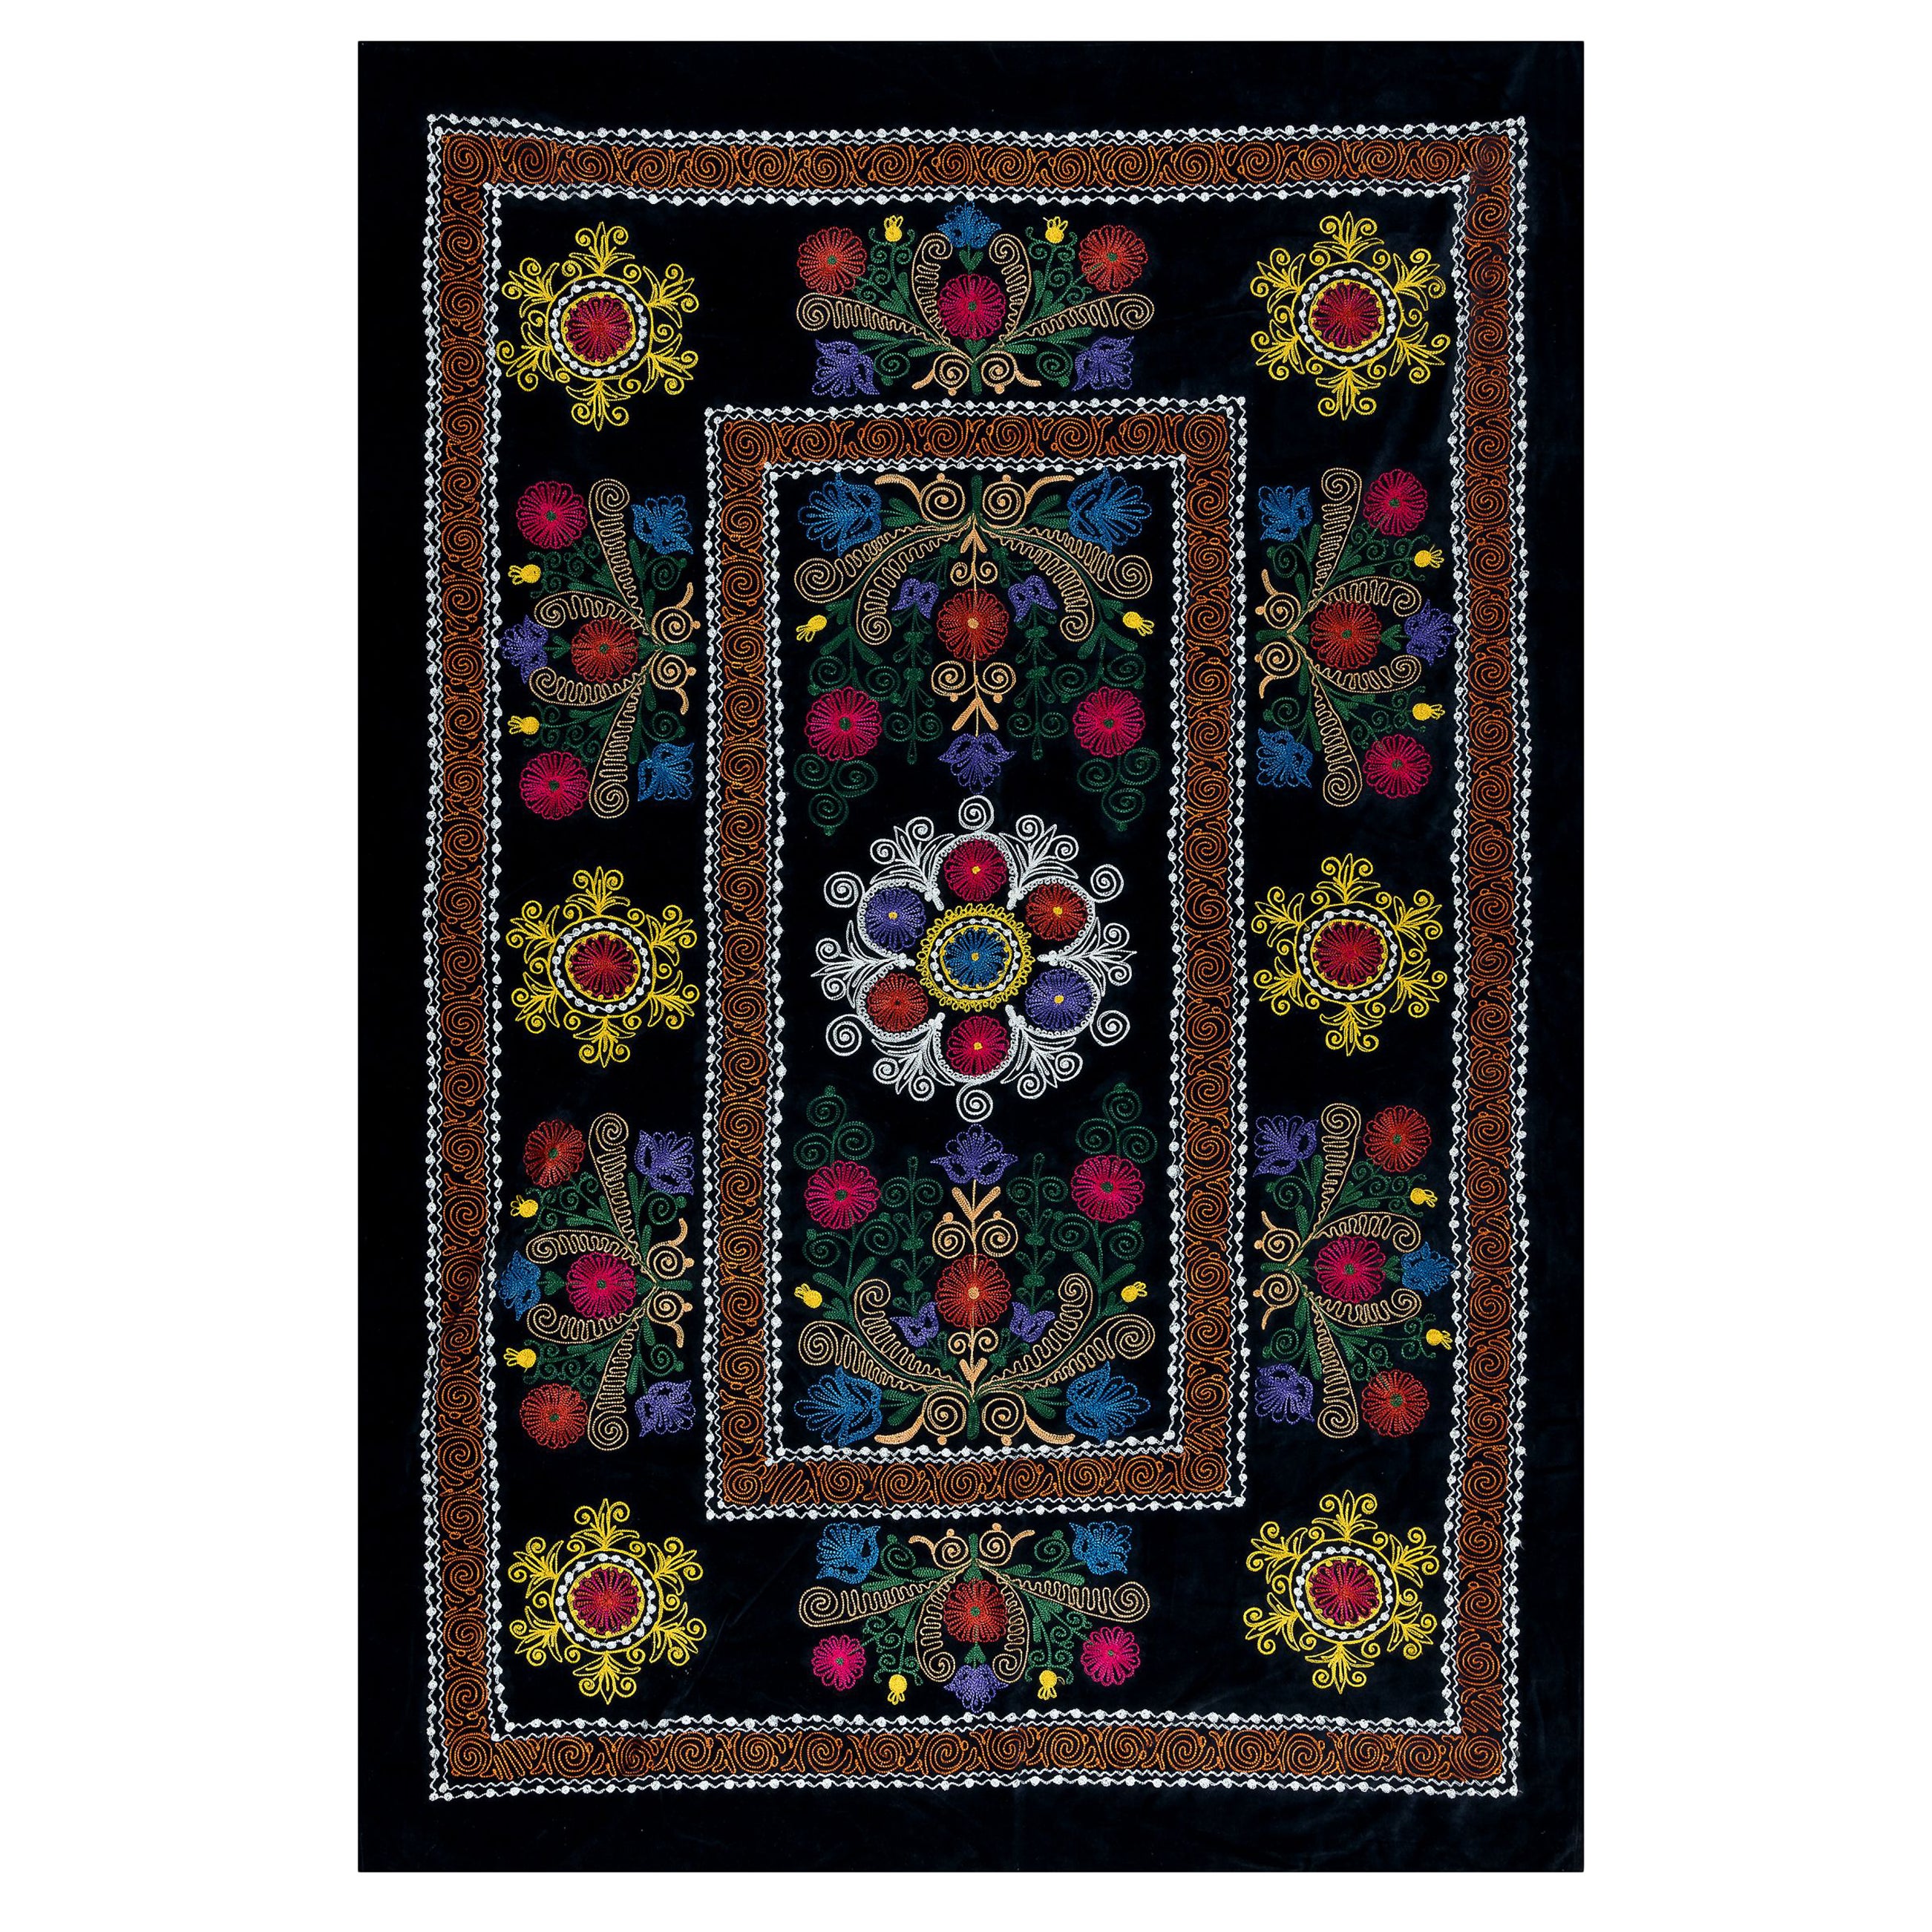 Vintage Hand Embroidery Table Cover, Uzbek Silk & Cotton Wall Hanging For Sale